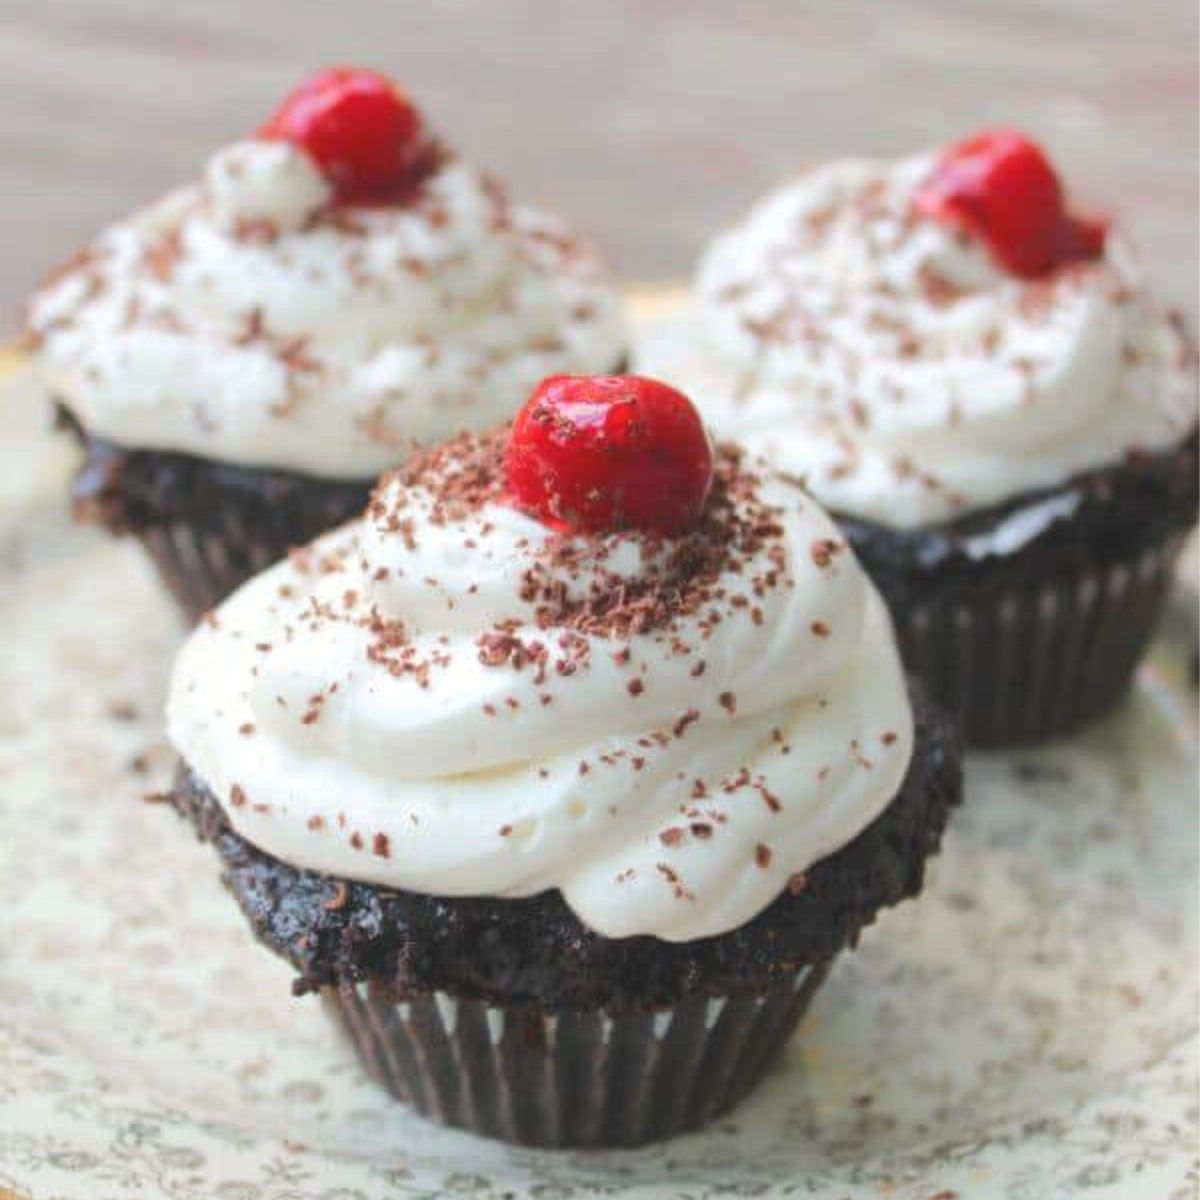 Three chocolate cupcakes with white icing and a cherry on top.